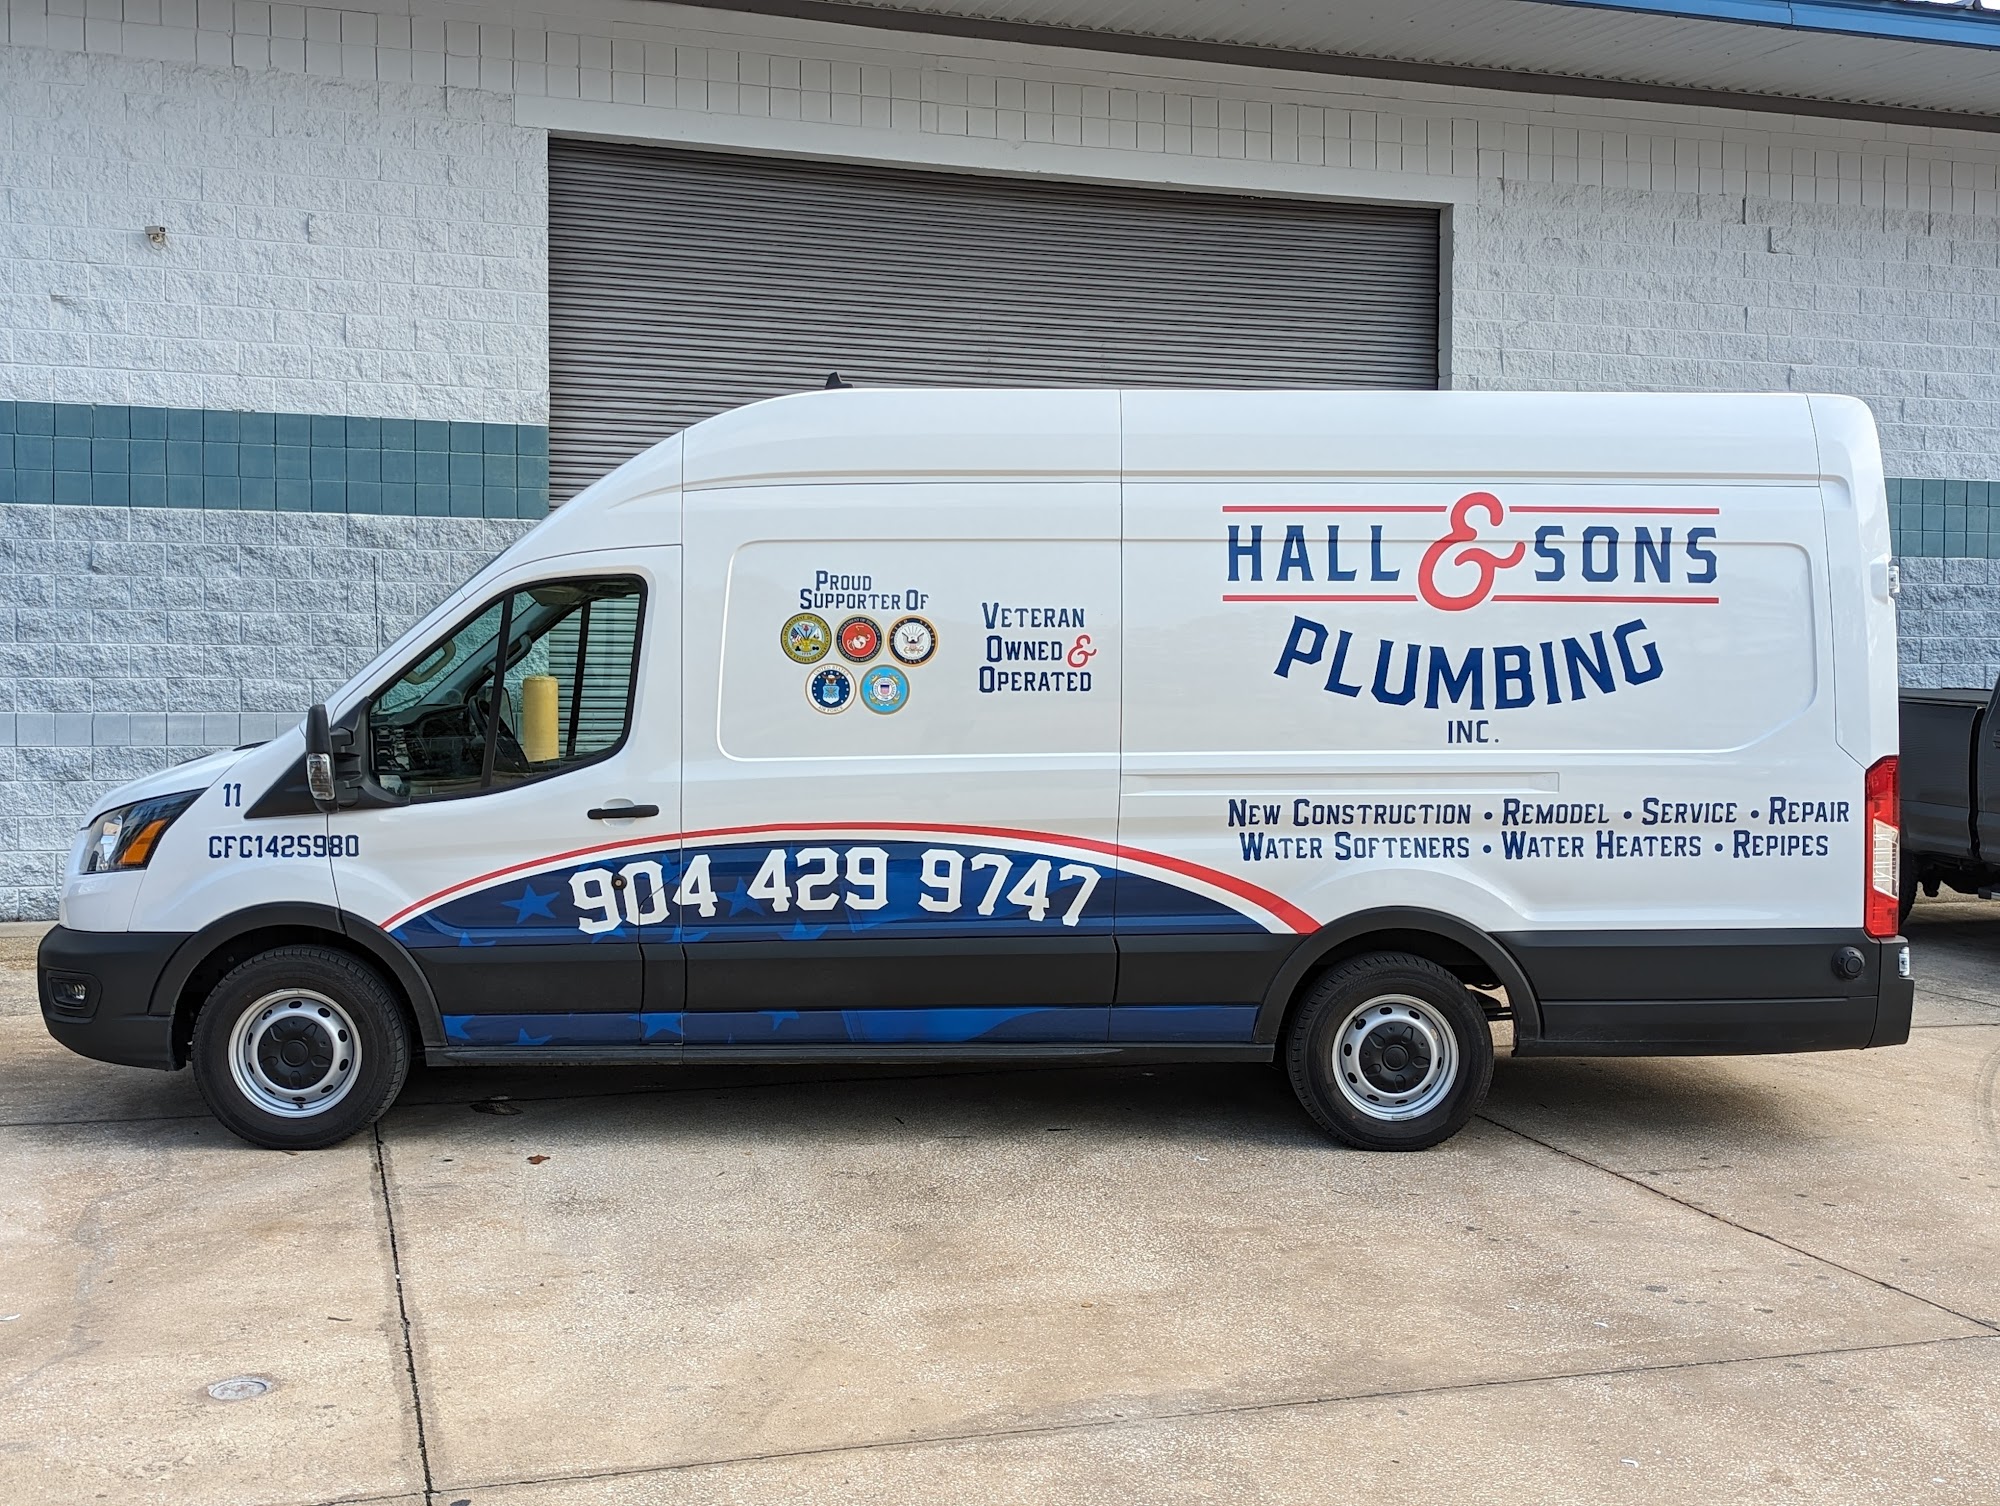 Hall and Sons Plumbing Inc 9716 Florida Mining Blvd W Suite 2, Jacksonville, FL 32257